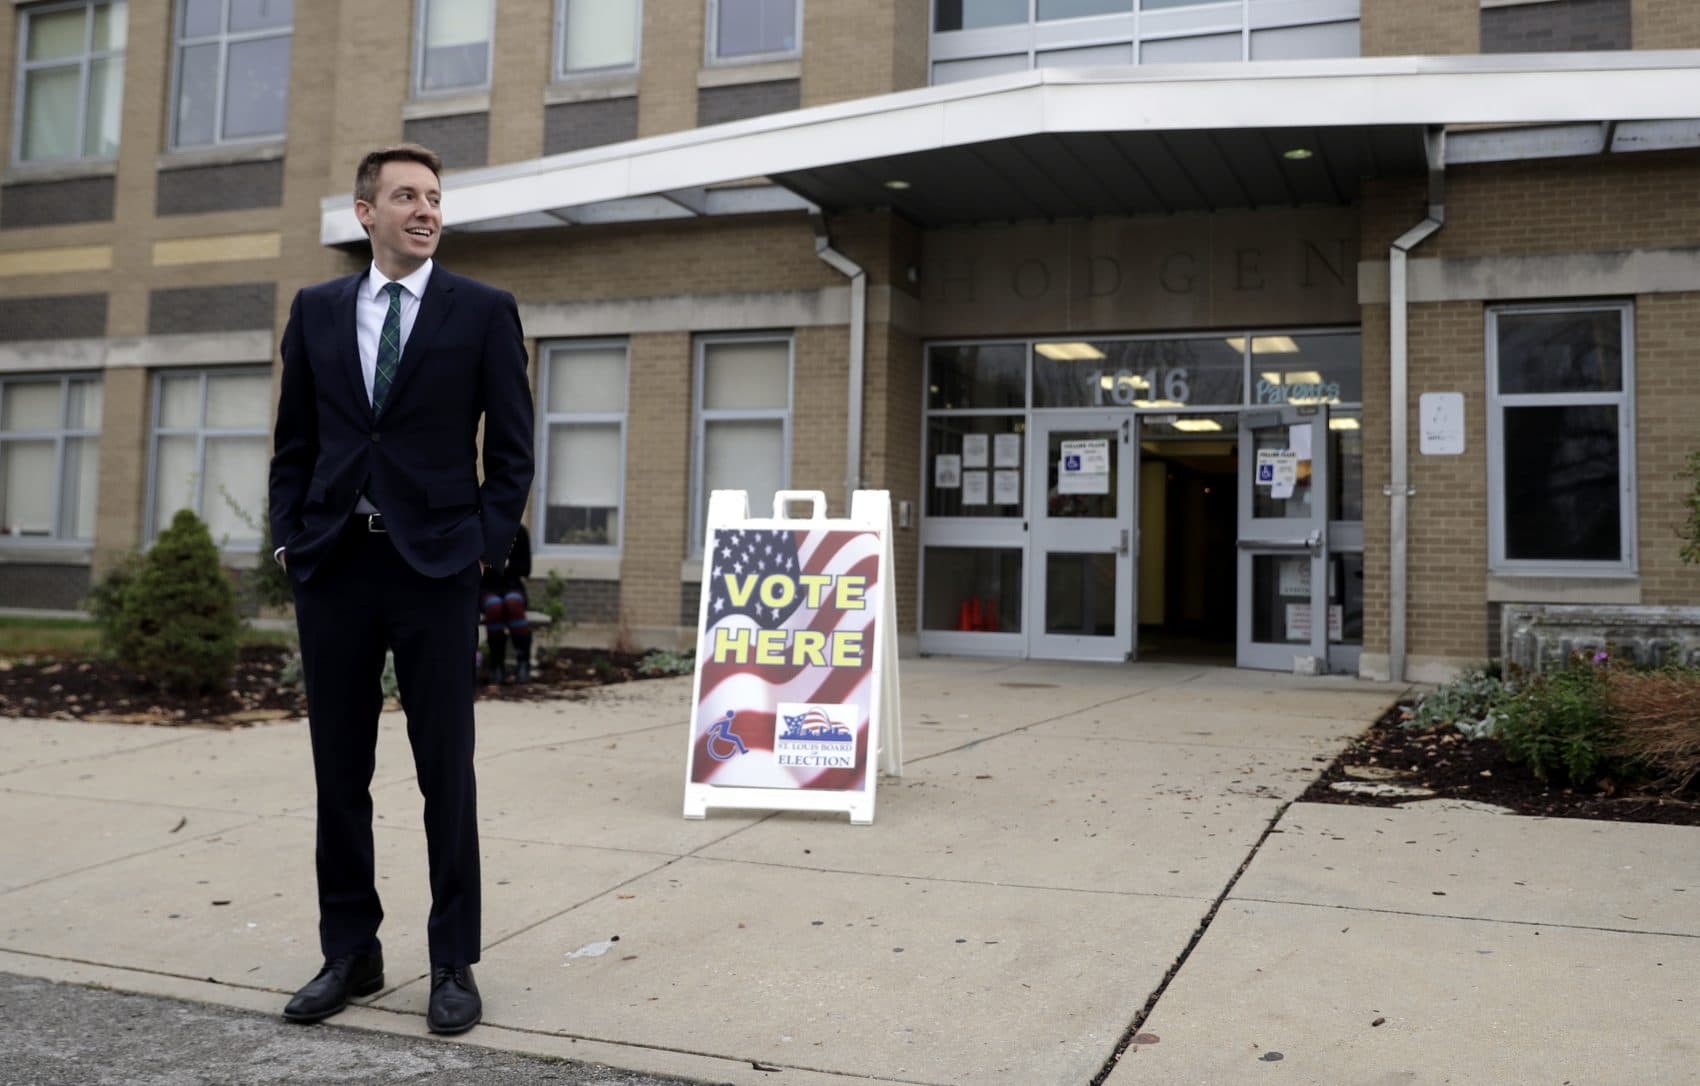 Jason Kander stands outside a polling place on, Nov. 8, 2016, in St. Louis, during his U.S. Senate campaign. (Jeff Roberson/AP)